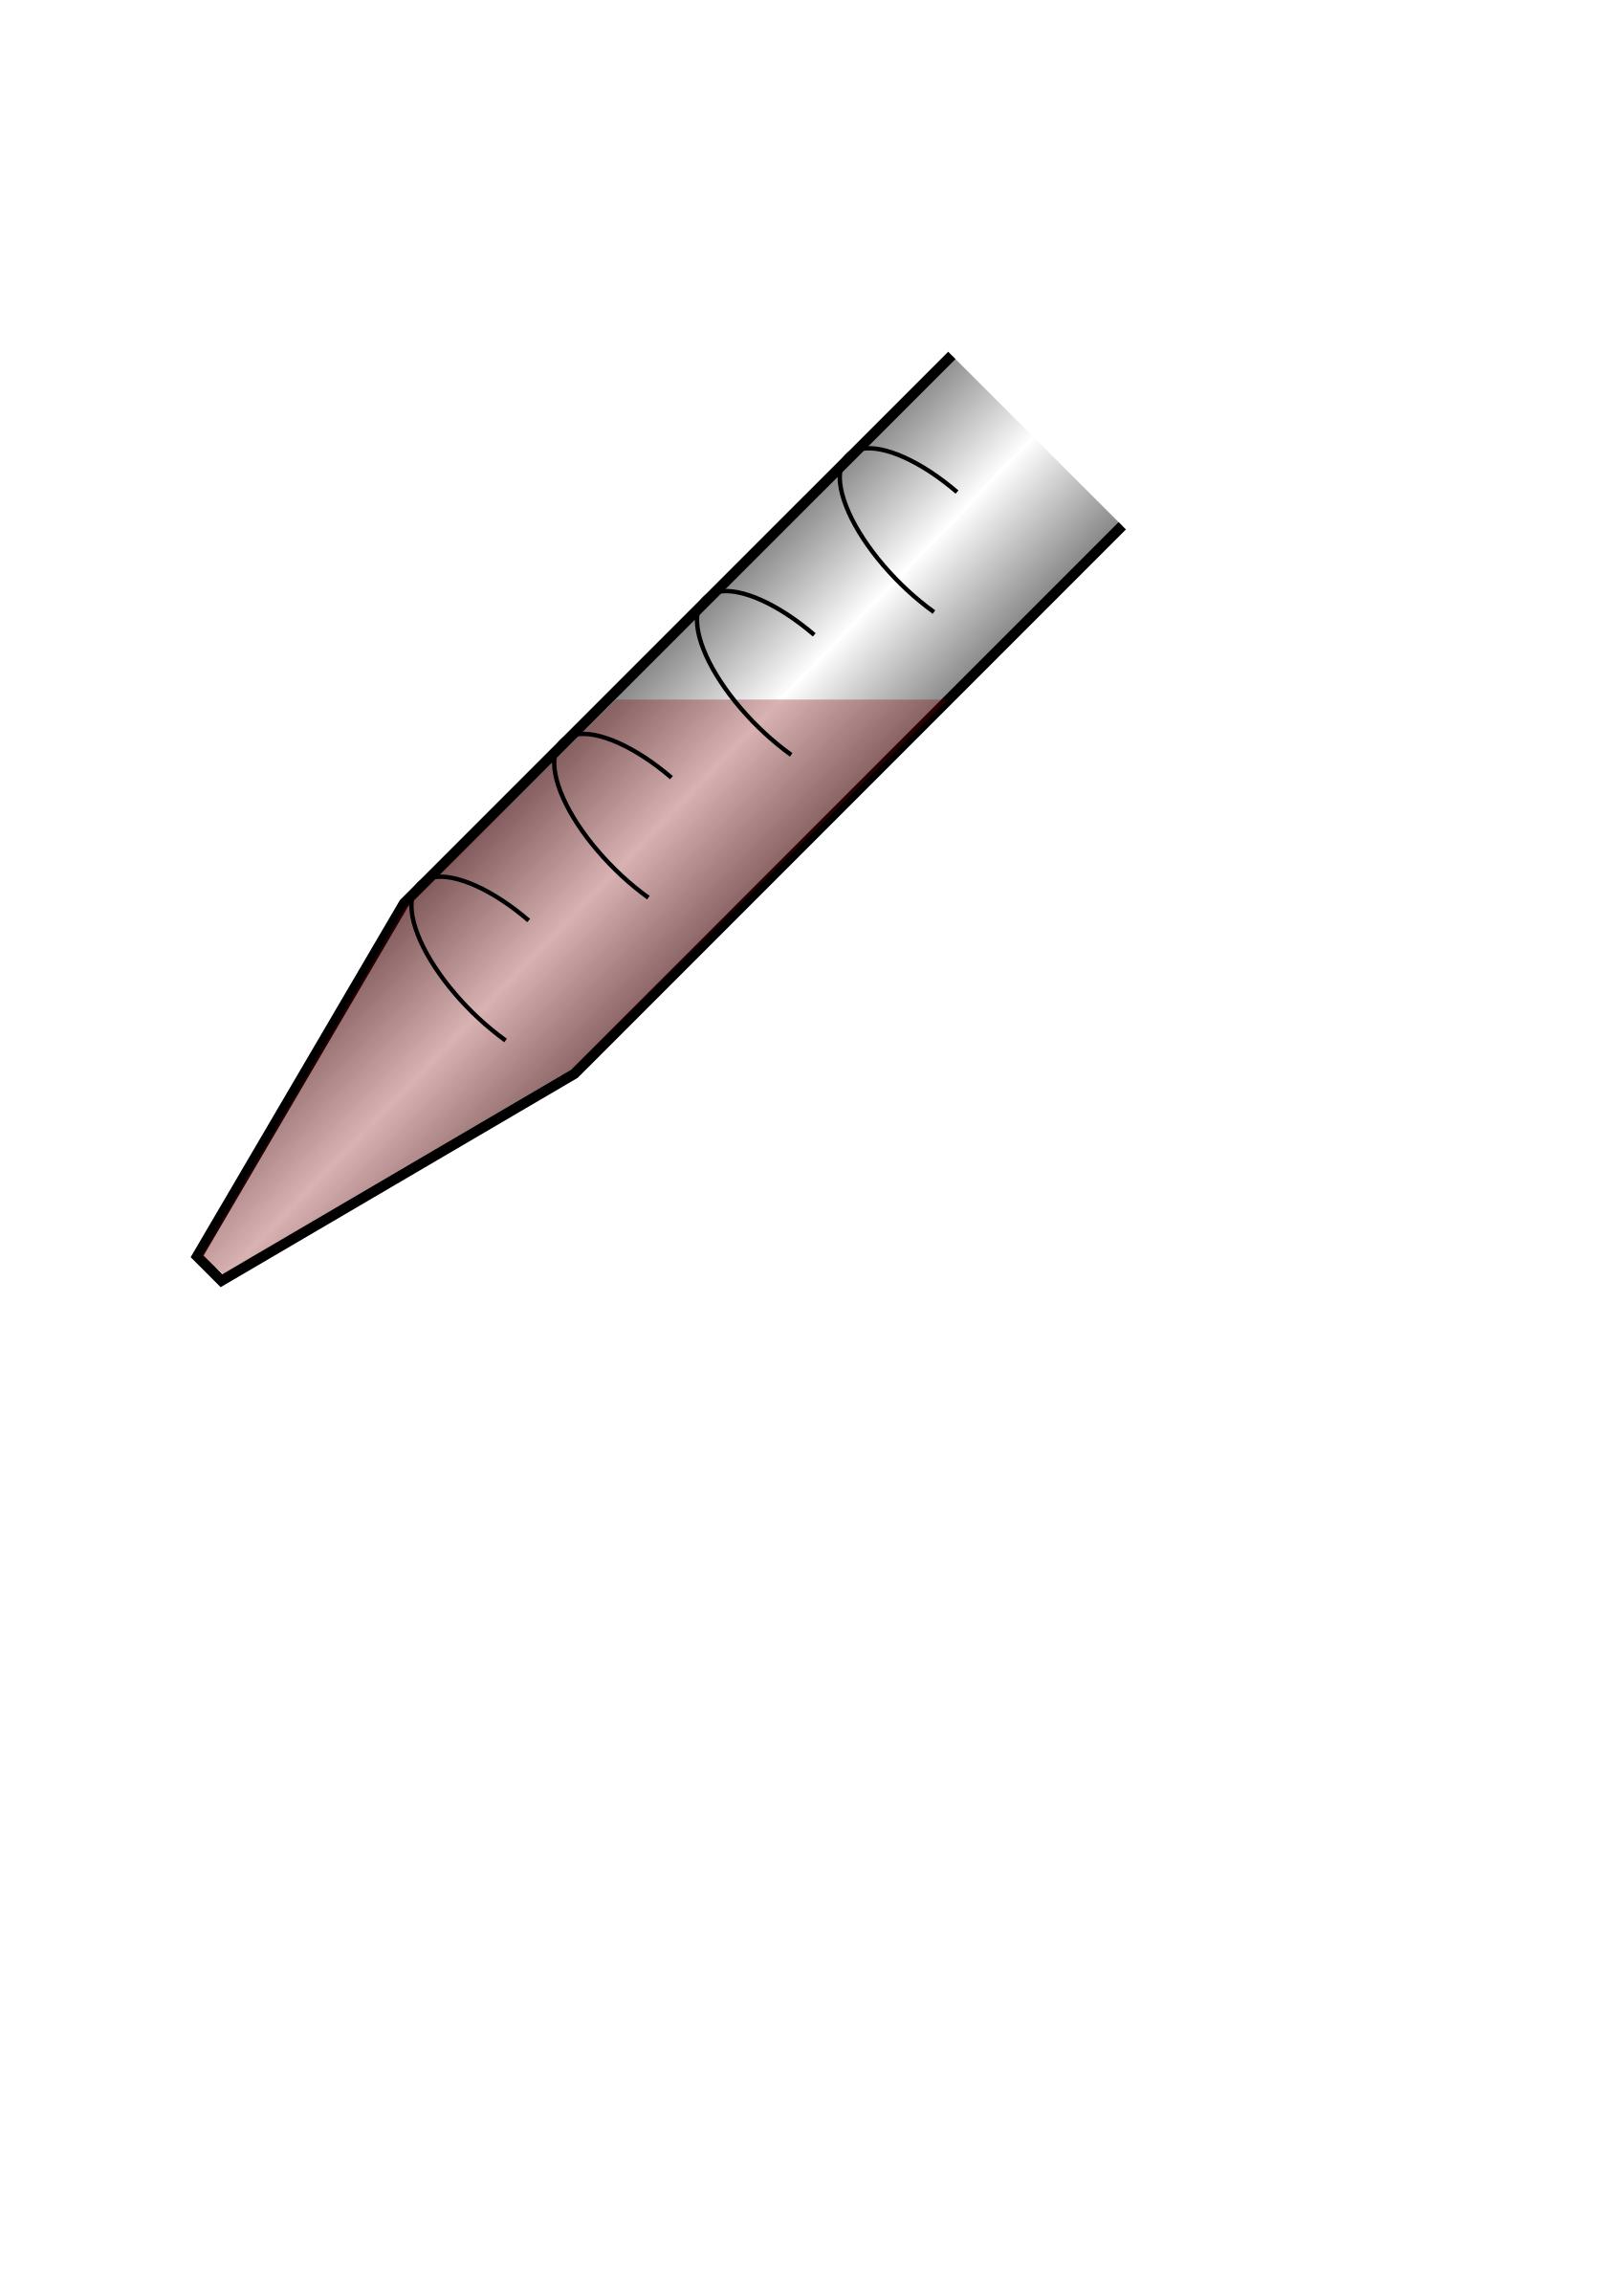 Pipette with Medium PNG icons